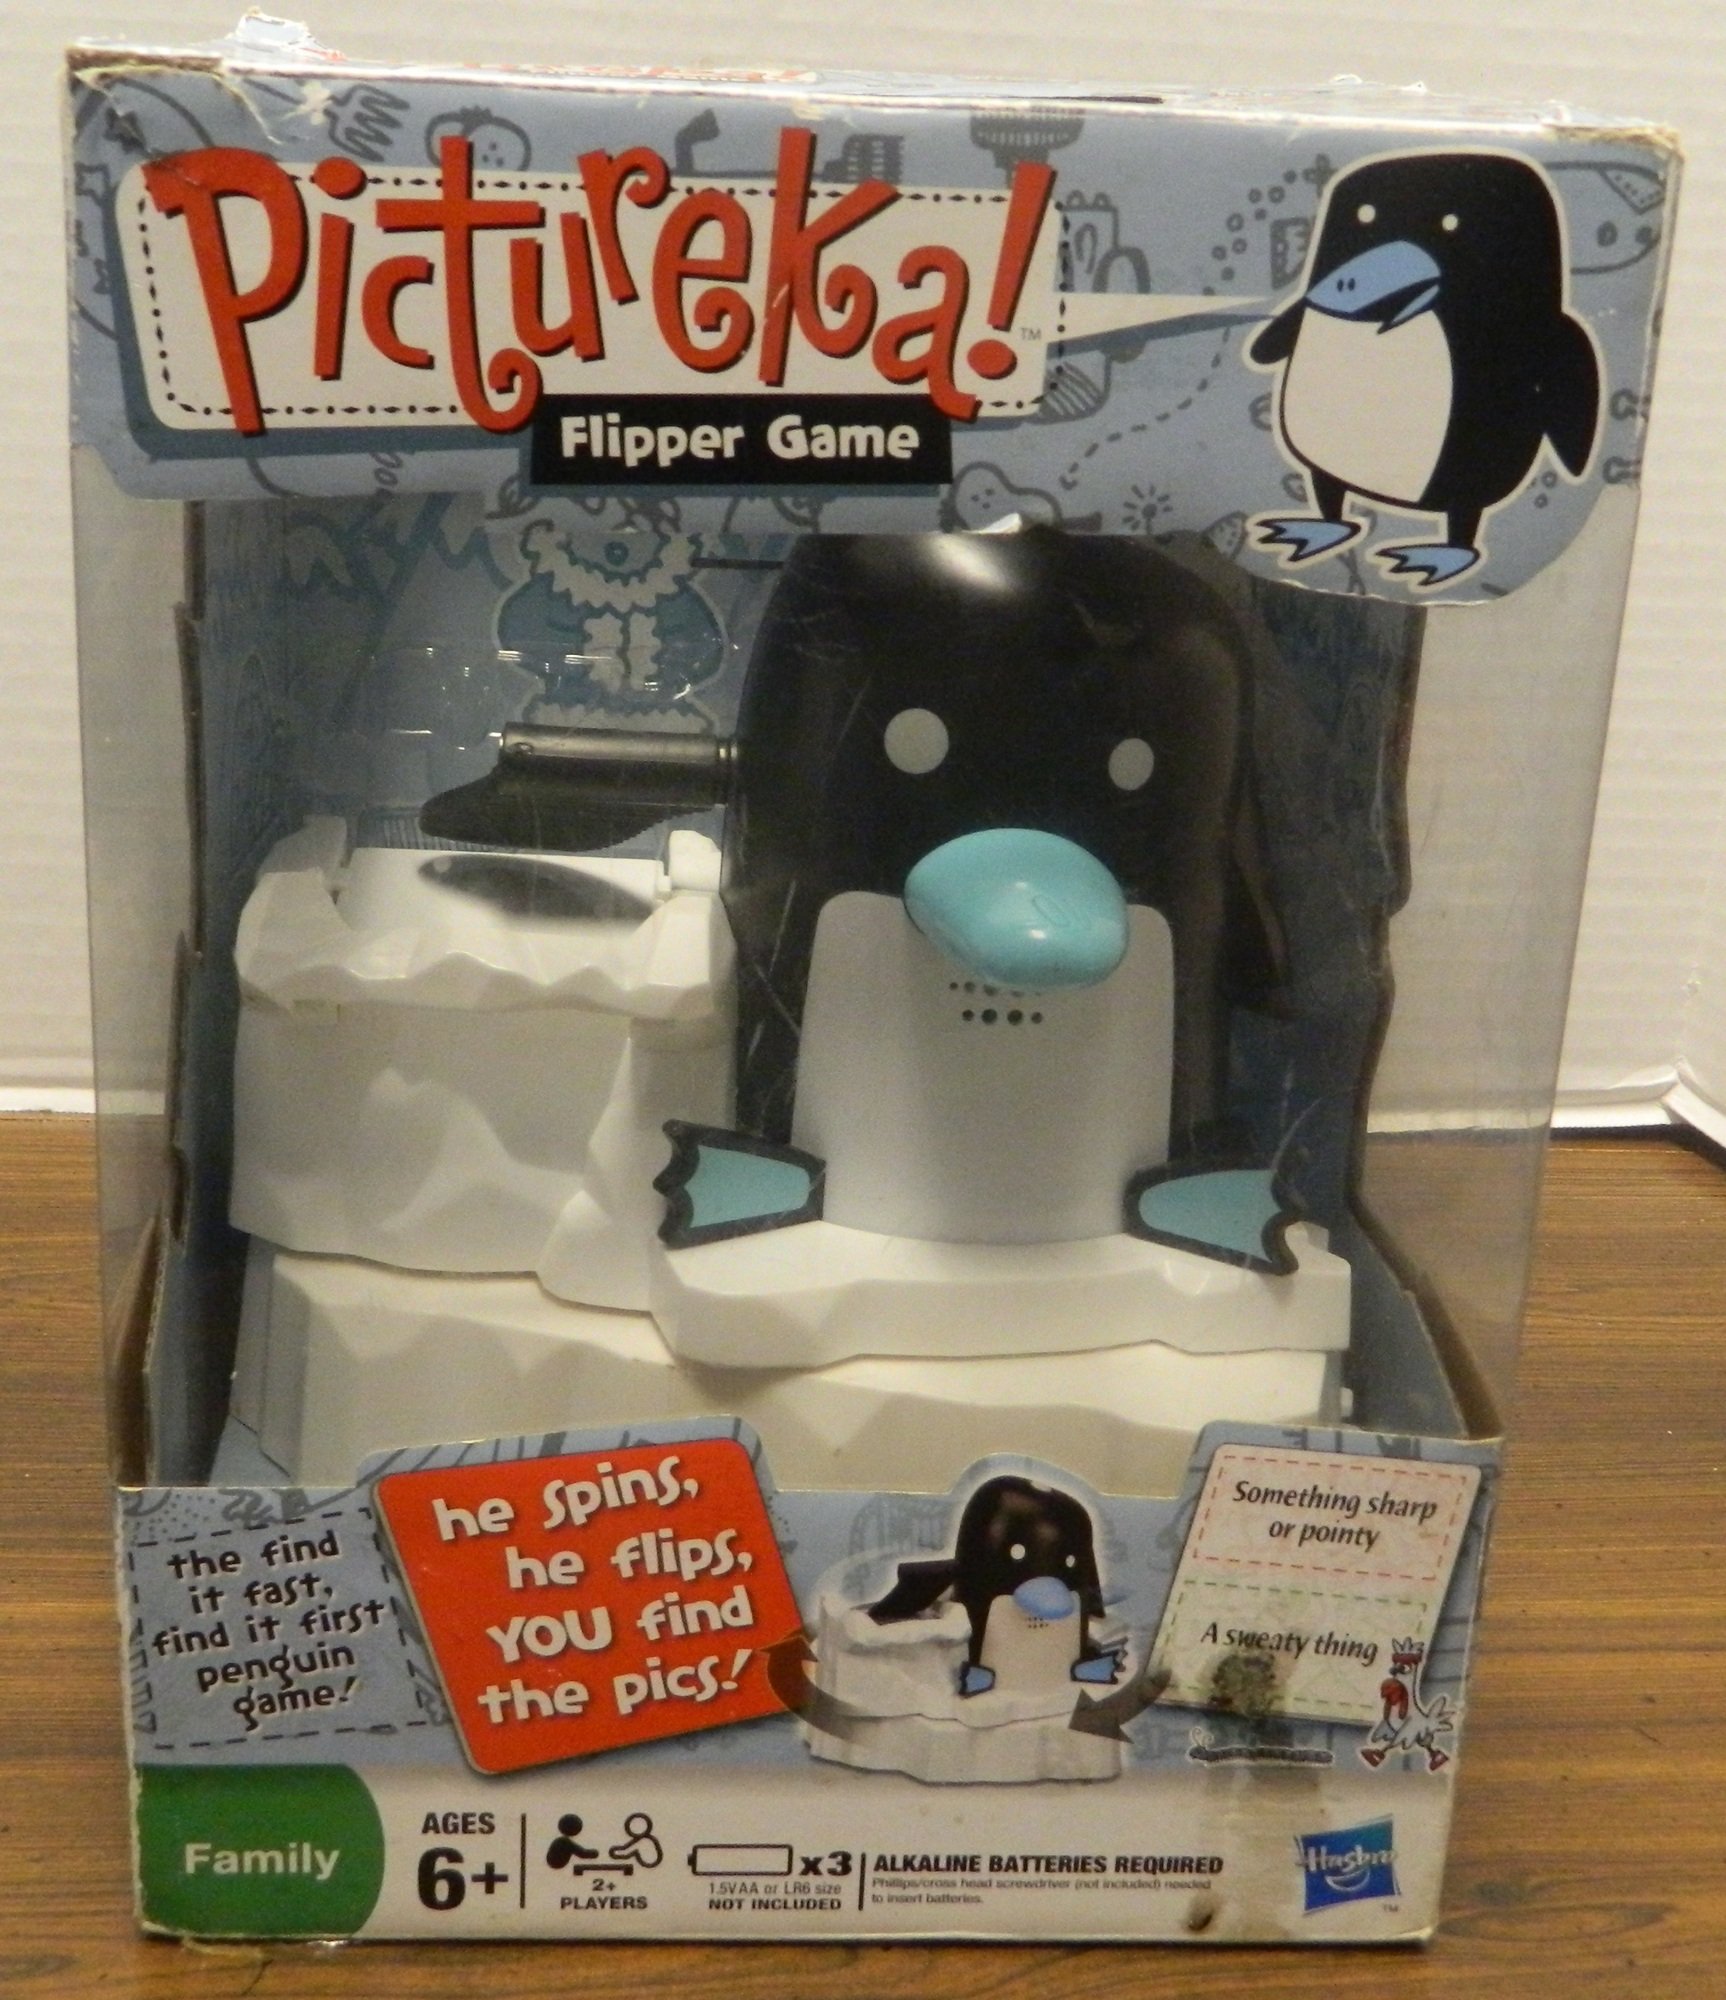 Pictureka! Flipper Board Game Review and Rules